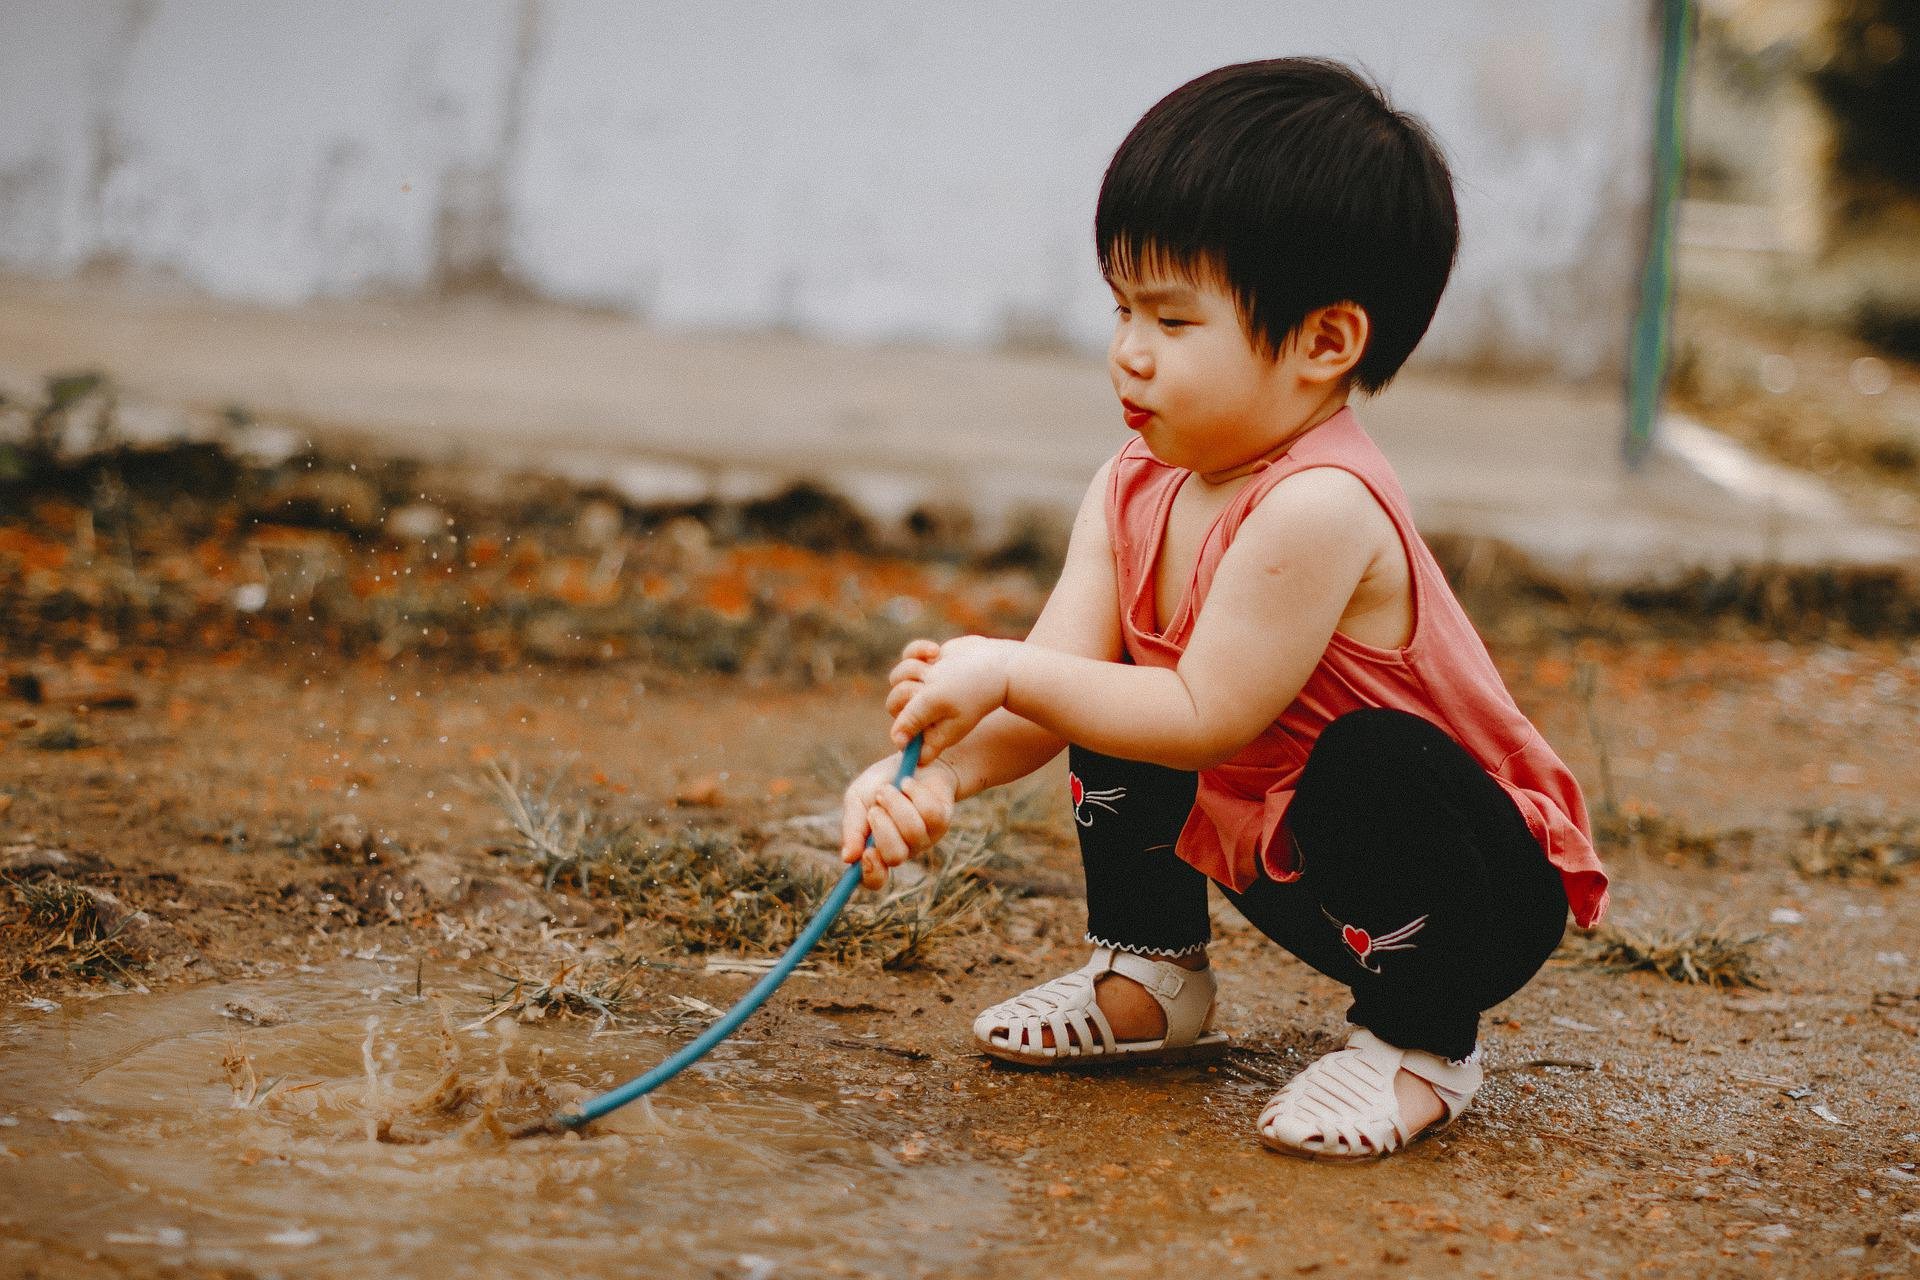 A toddler plays in mud.